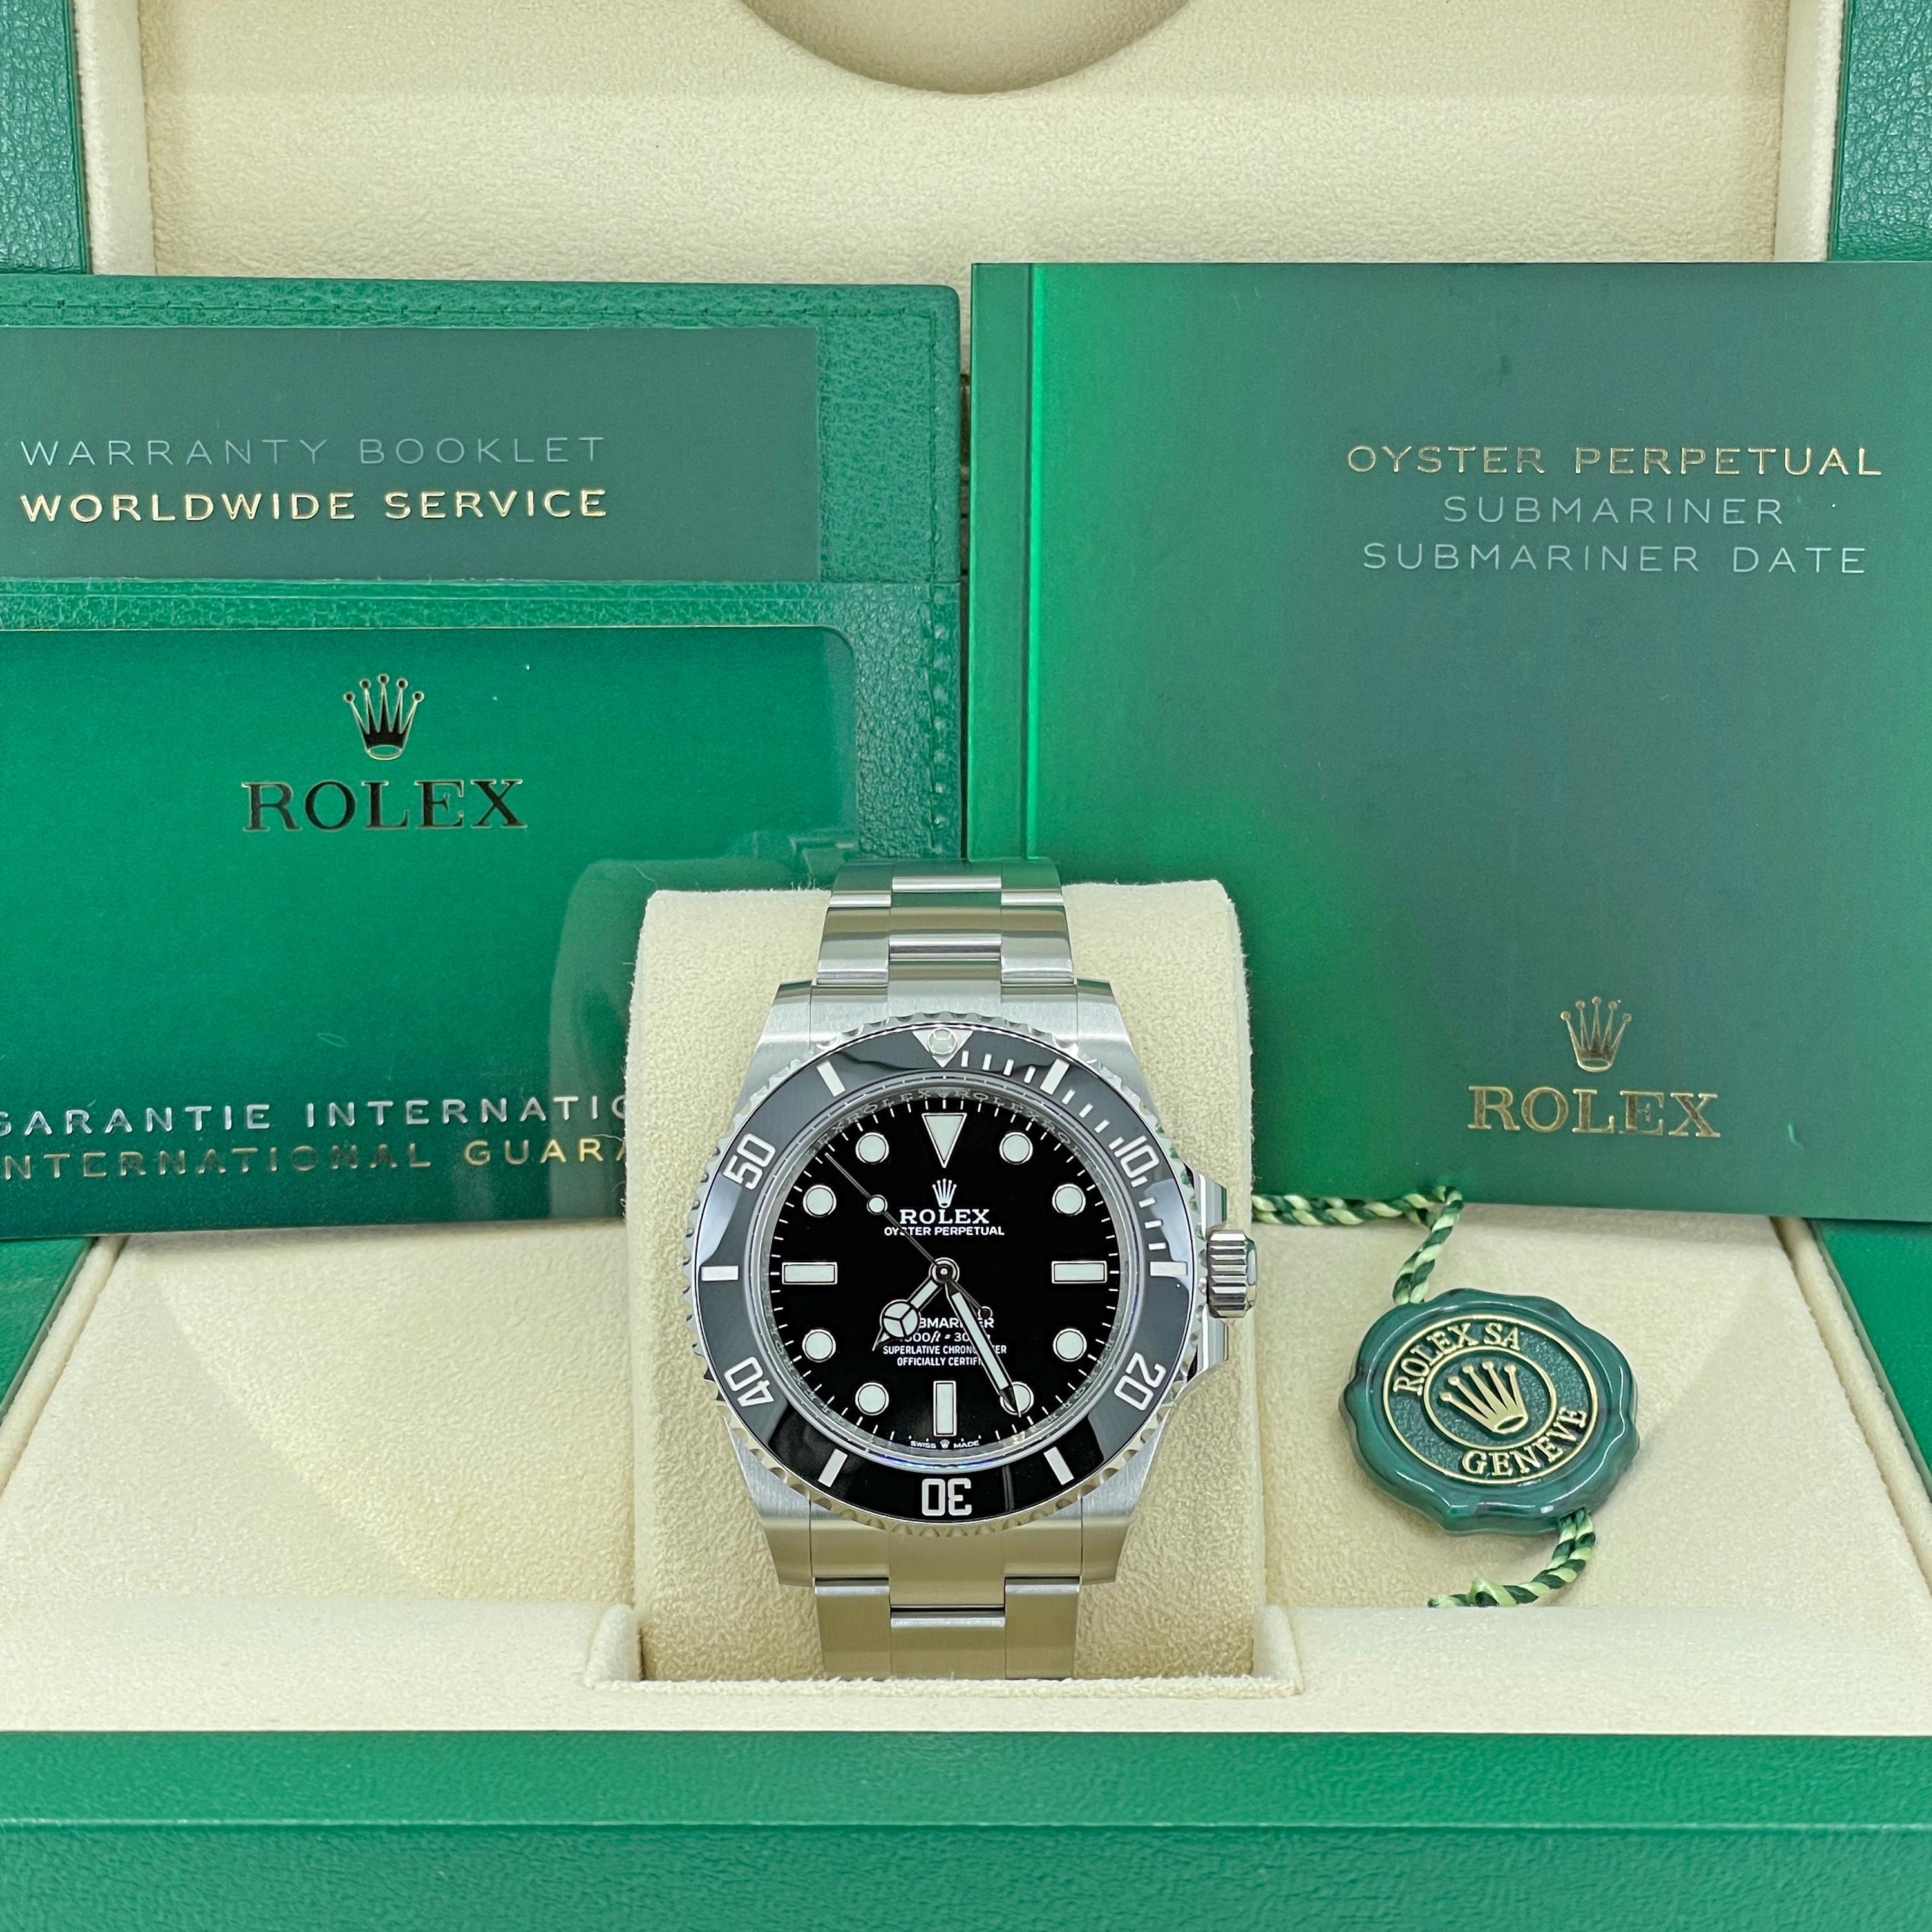 The watch is Unworn and Complete with the original Rolex Box and Rolex Warranty card dated 2022.

41mm Stainless Steel Rolex Oyster Perpetual Submariner with Black Dial and Black Ceramic Insert Uni-directional Rotating Bezel. The watch case is made